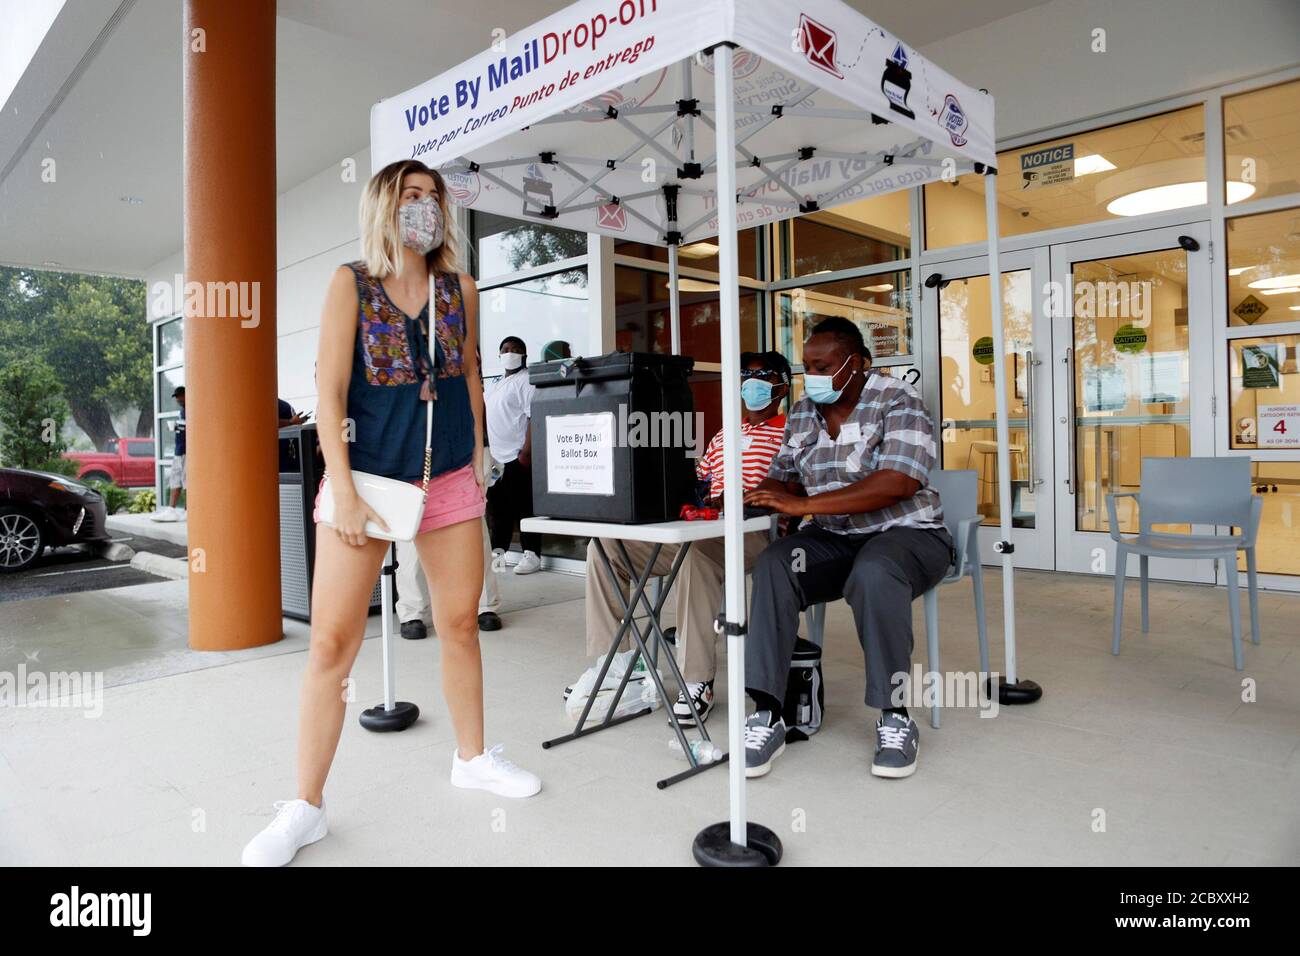 A voter drops off their mail-in voting ballot on the last day of early voting for the U.S. presidential election at the C. Blythe Andrews, Jr. Public Library in East Tampa, Florida, U.S., August 16, 2020.  REUTERS/Octavio Jones Stock Photo